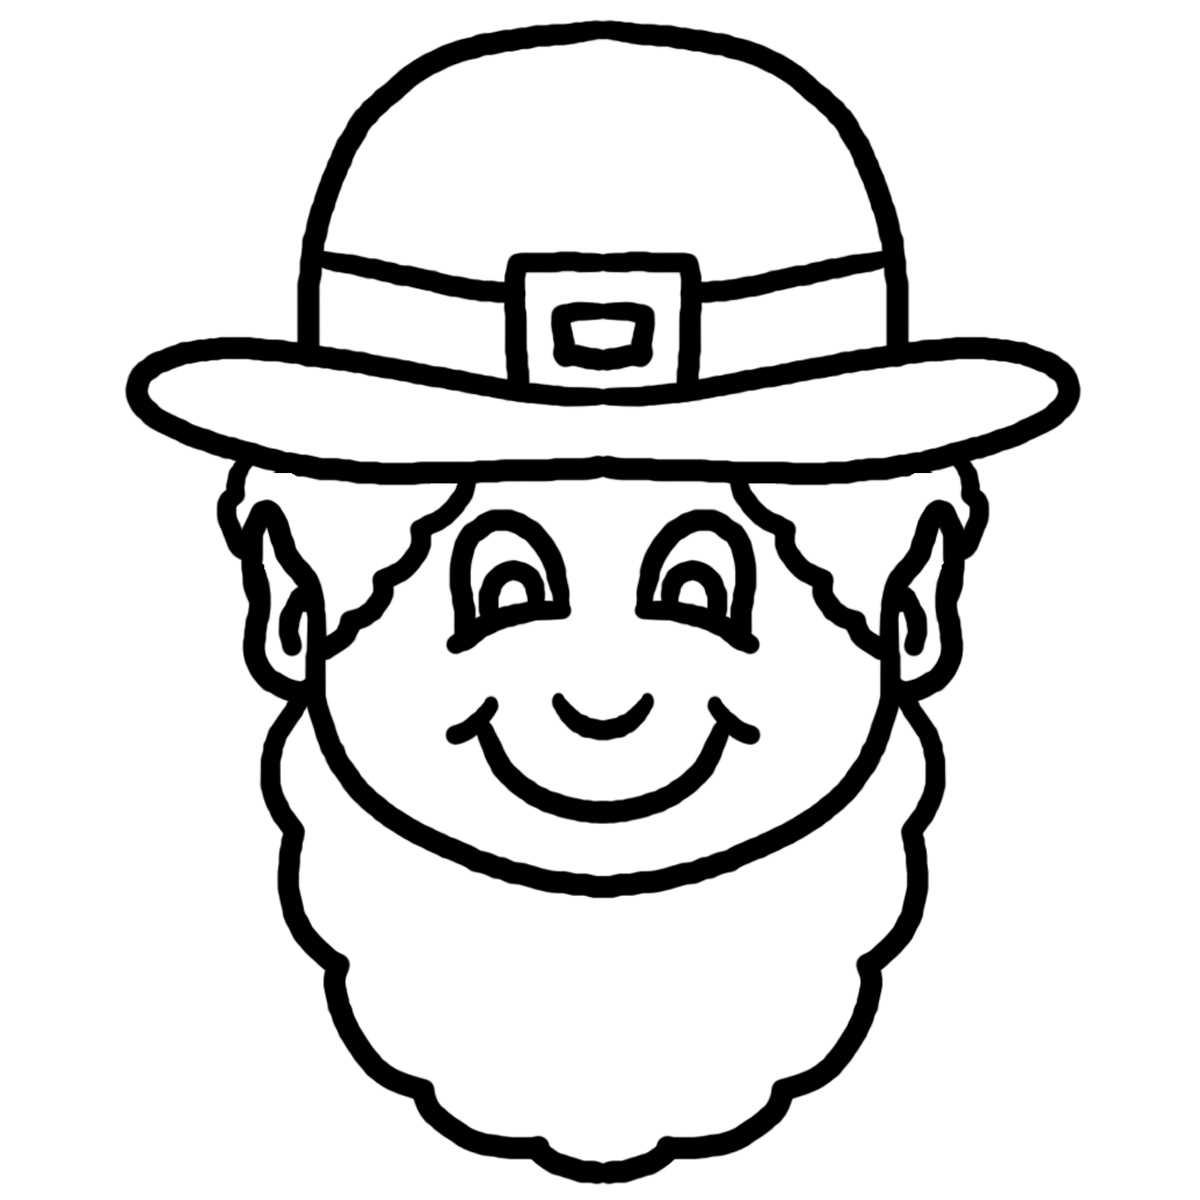 This Black And White Cartoon Leprechaun Face Clipart Illustration Coloring Page